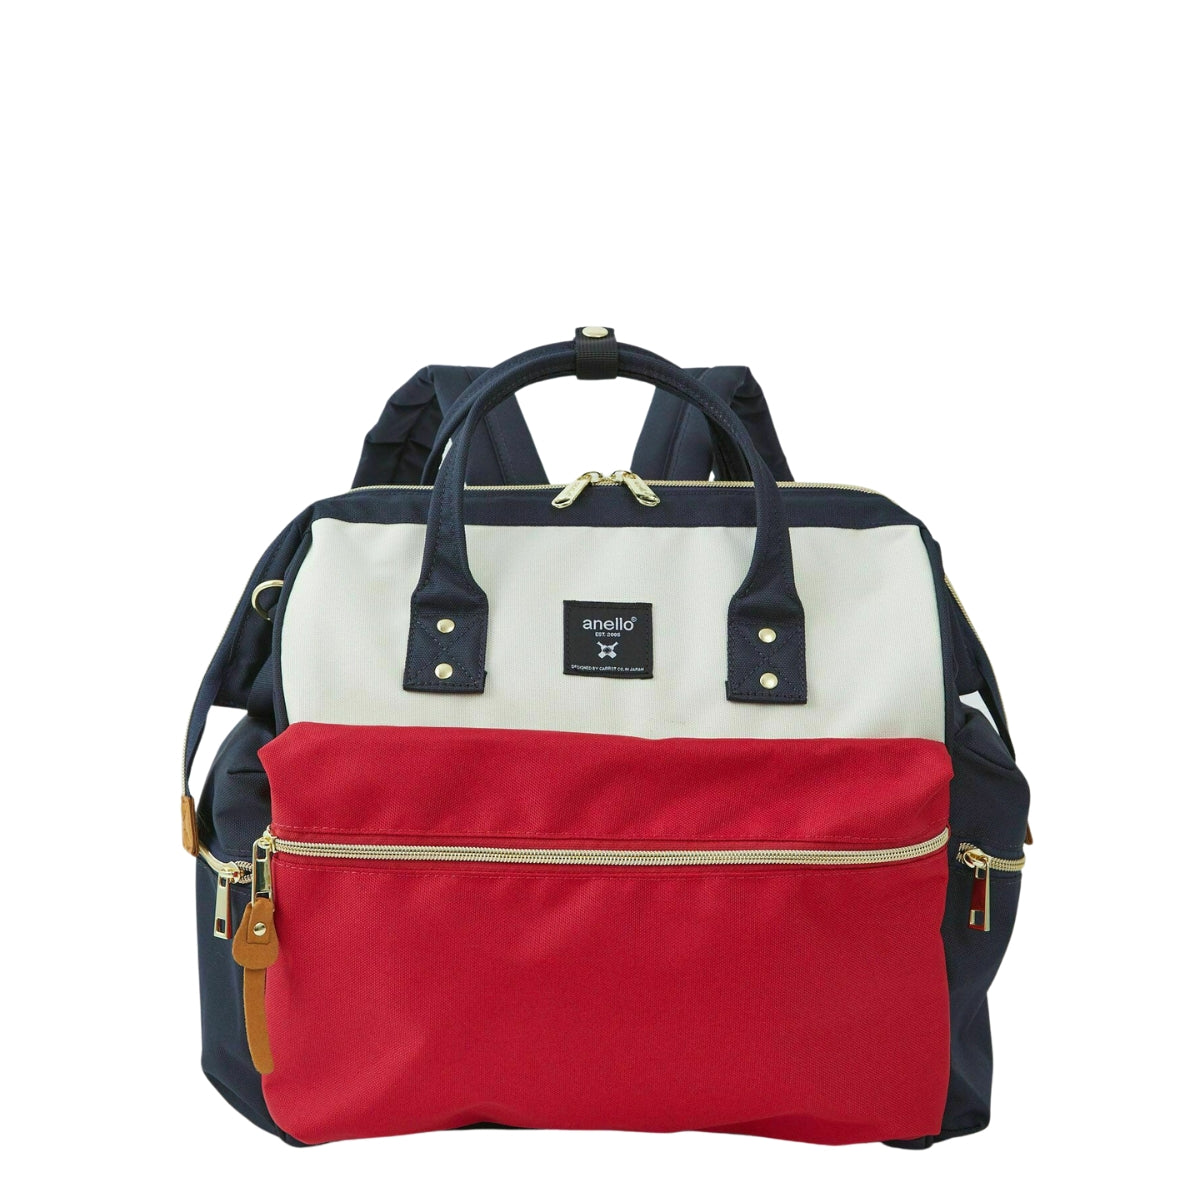 Anello Backpack In Red, White and Blue 